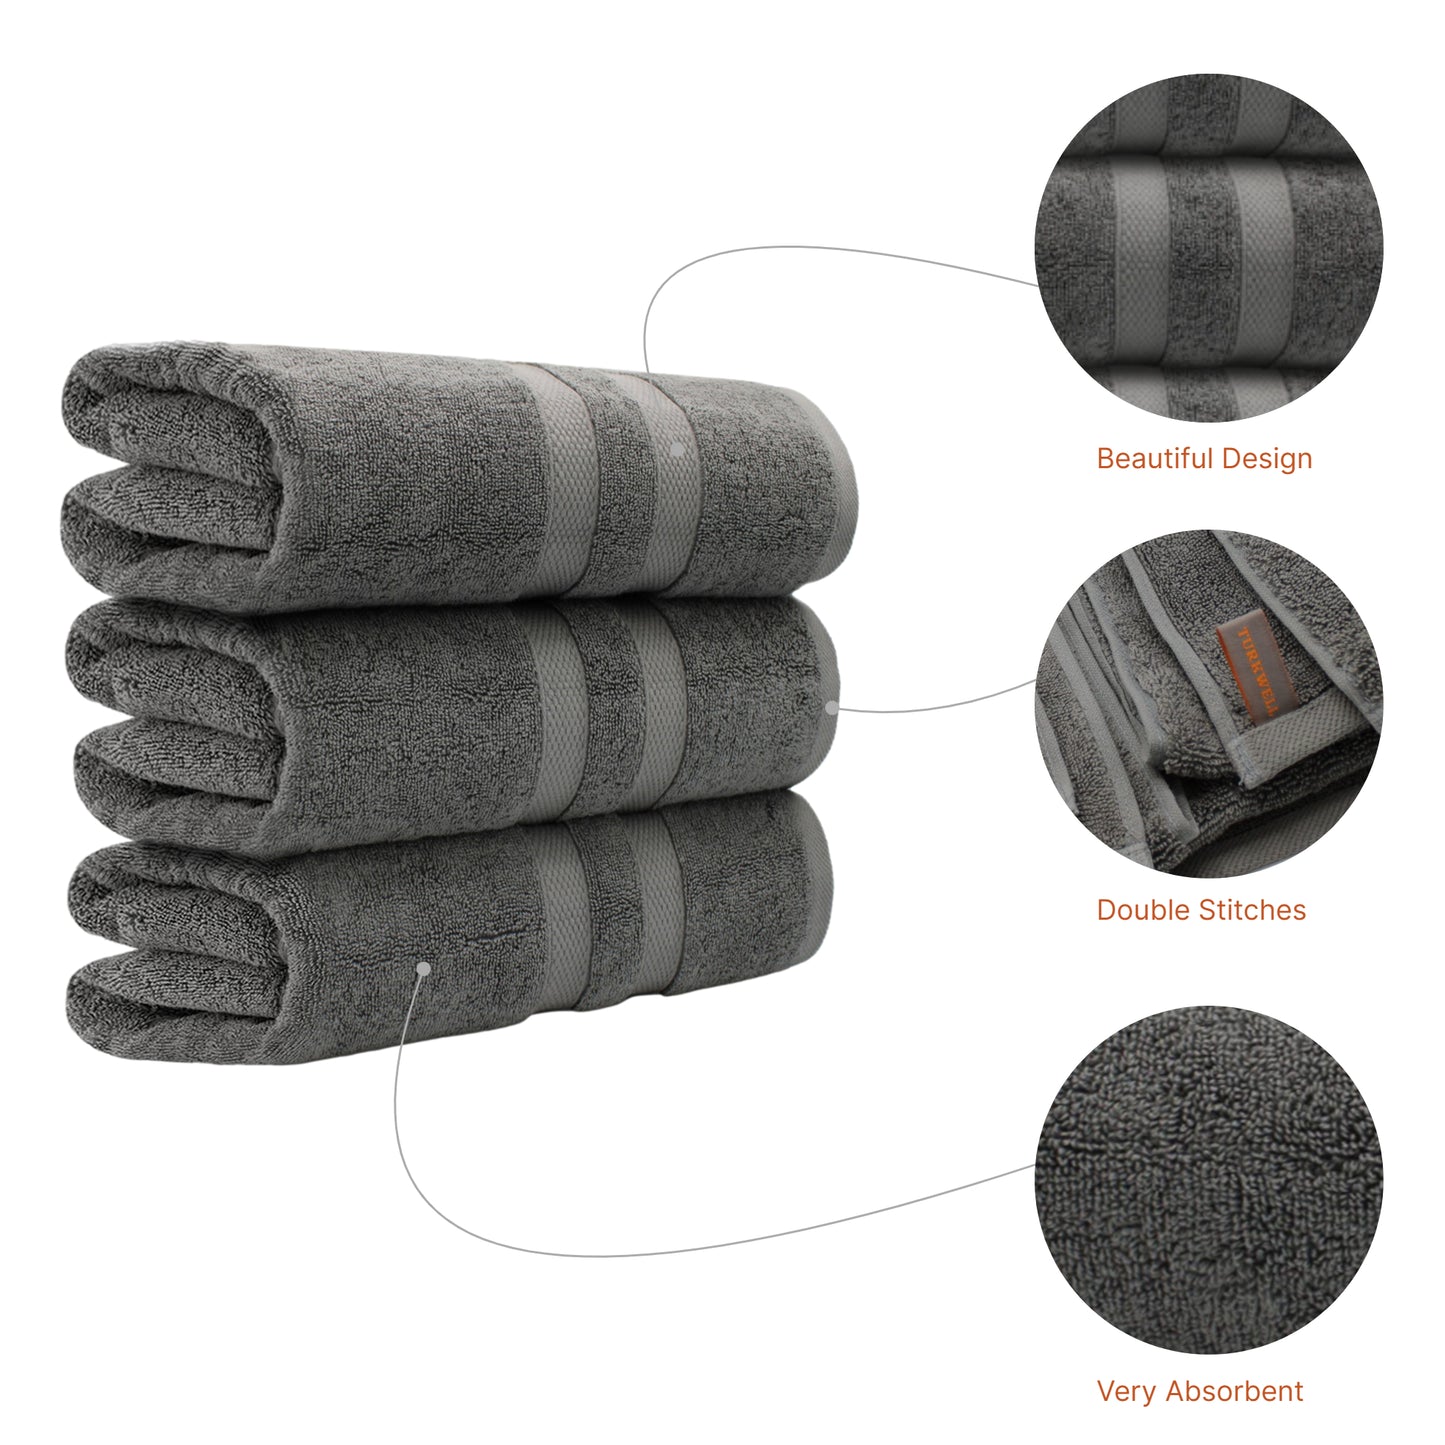 Wholesale Turkwell Bath Towels 100% Combed Cotton, 27x54 in, Gray, BOX of 12